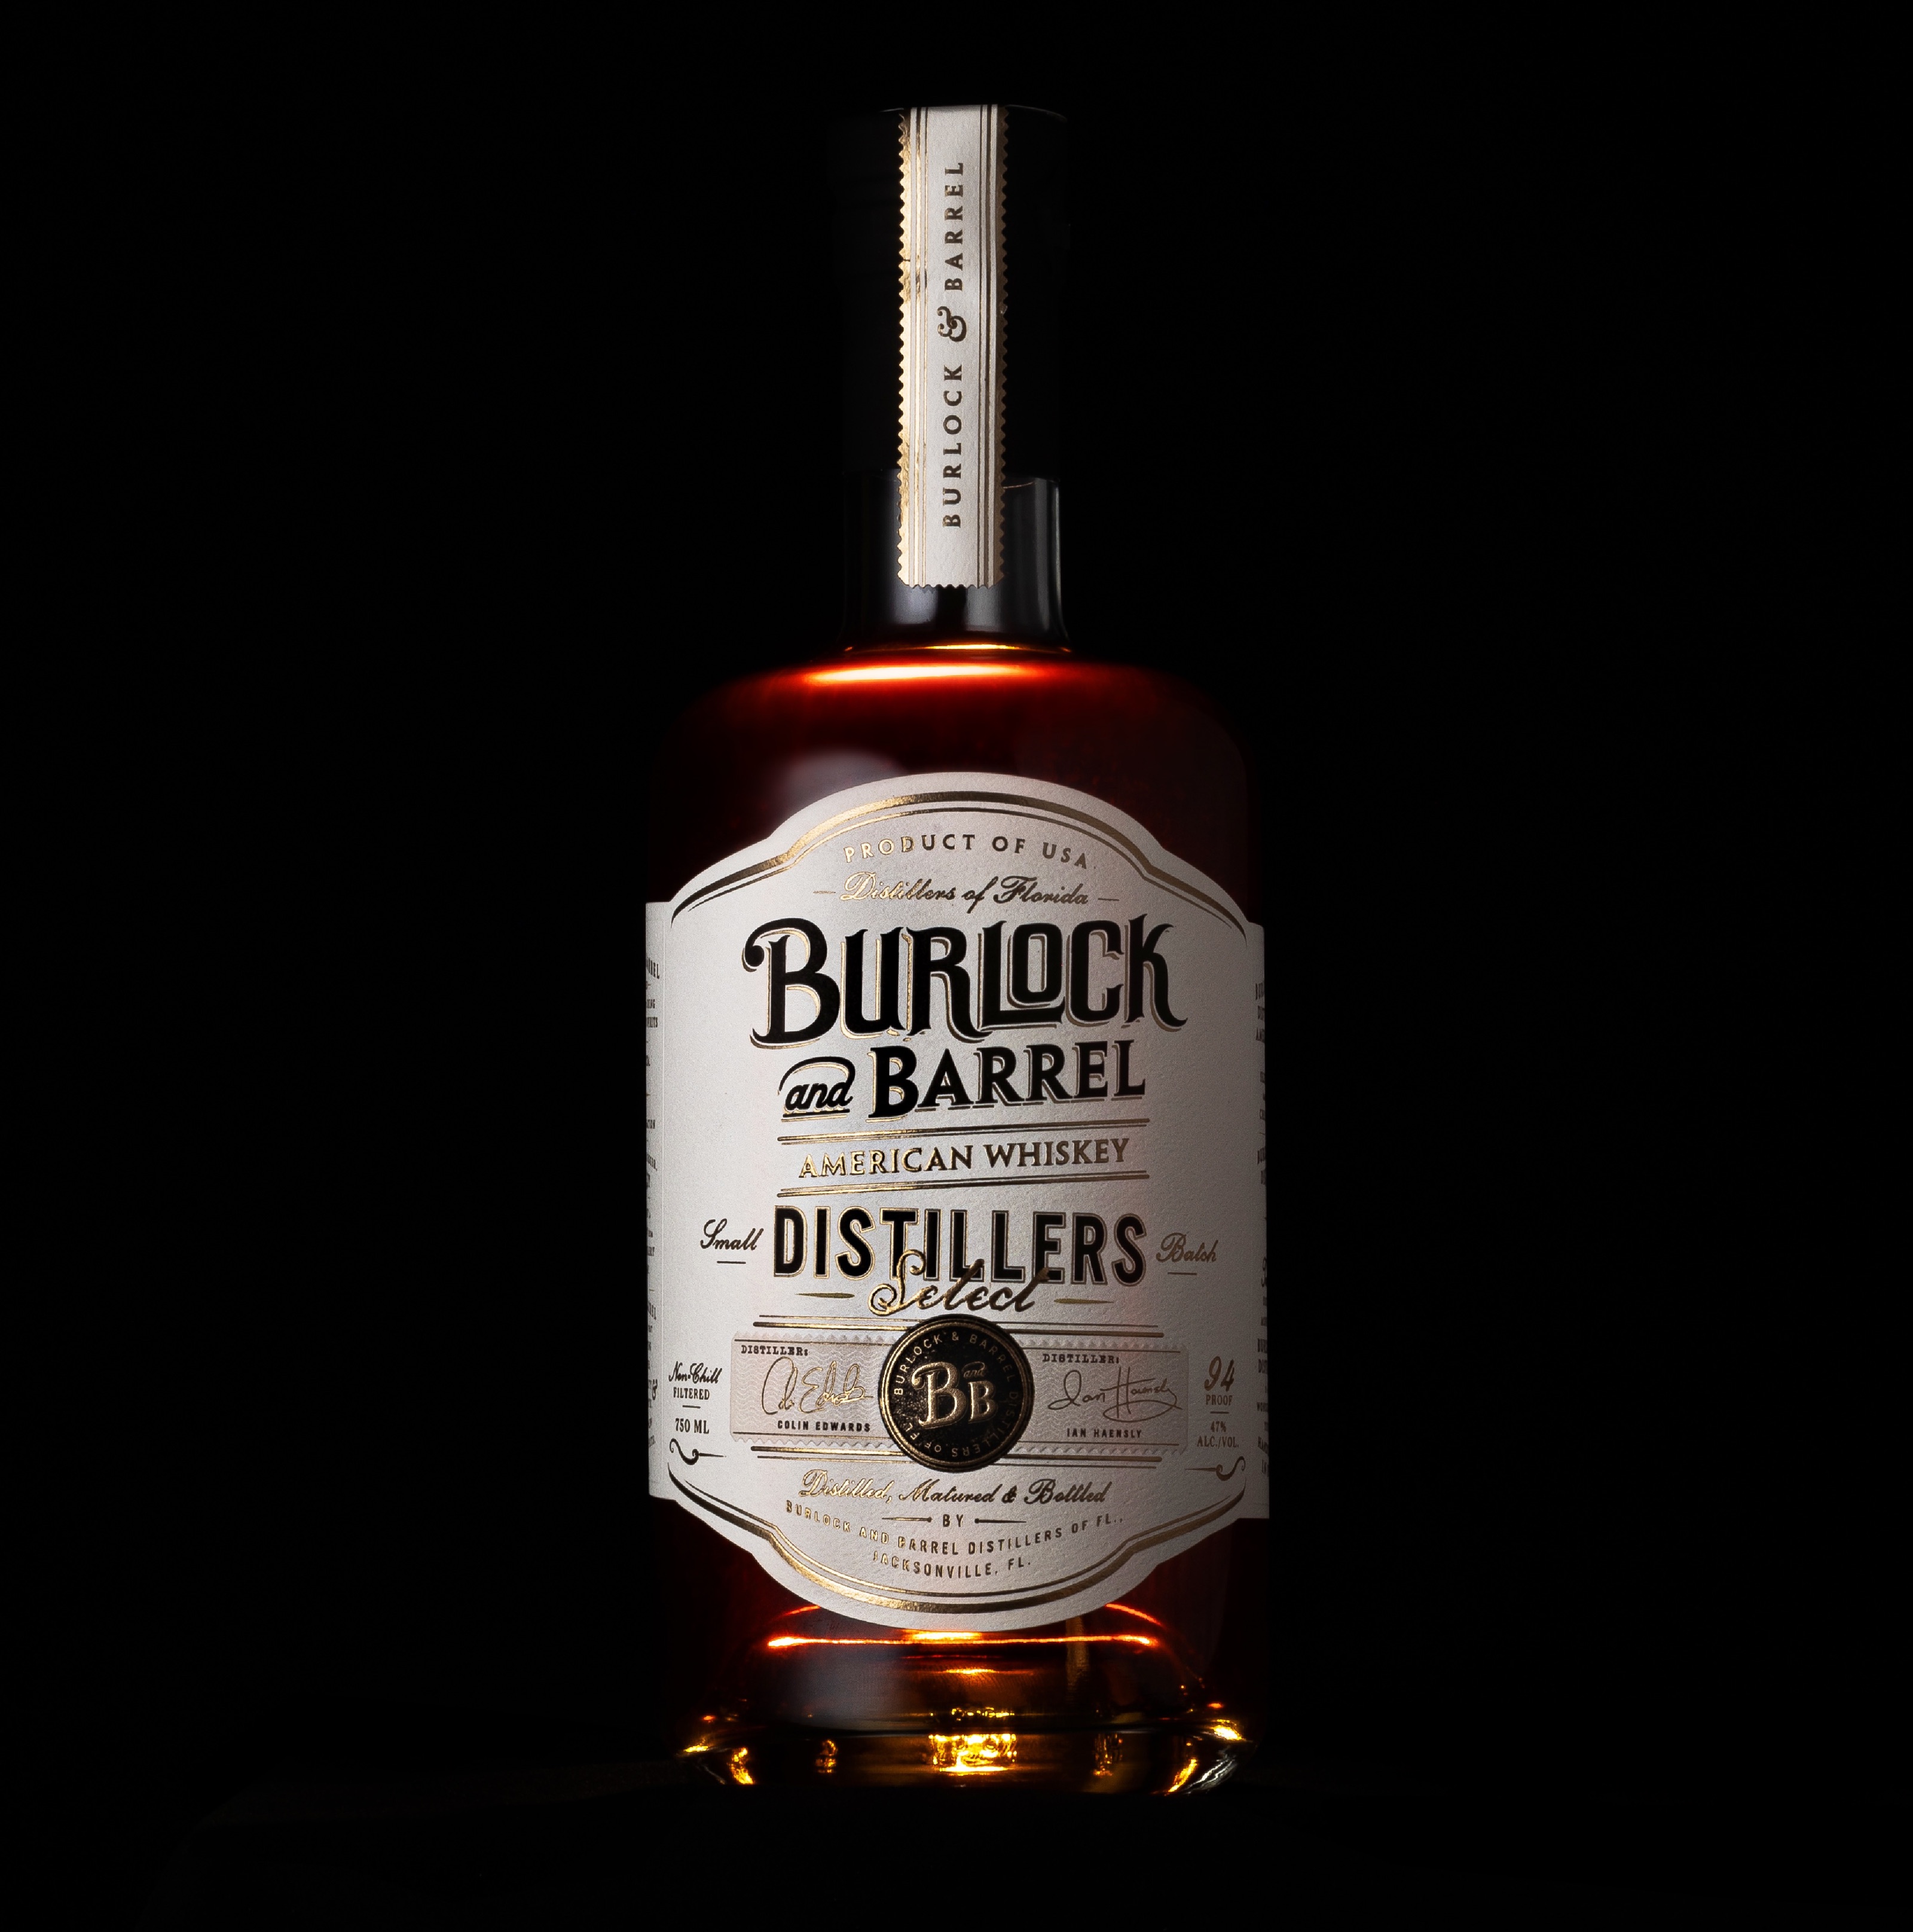 Burlock and Barrel Distillers Select by Brand Hatch Creative